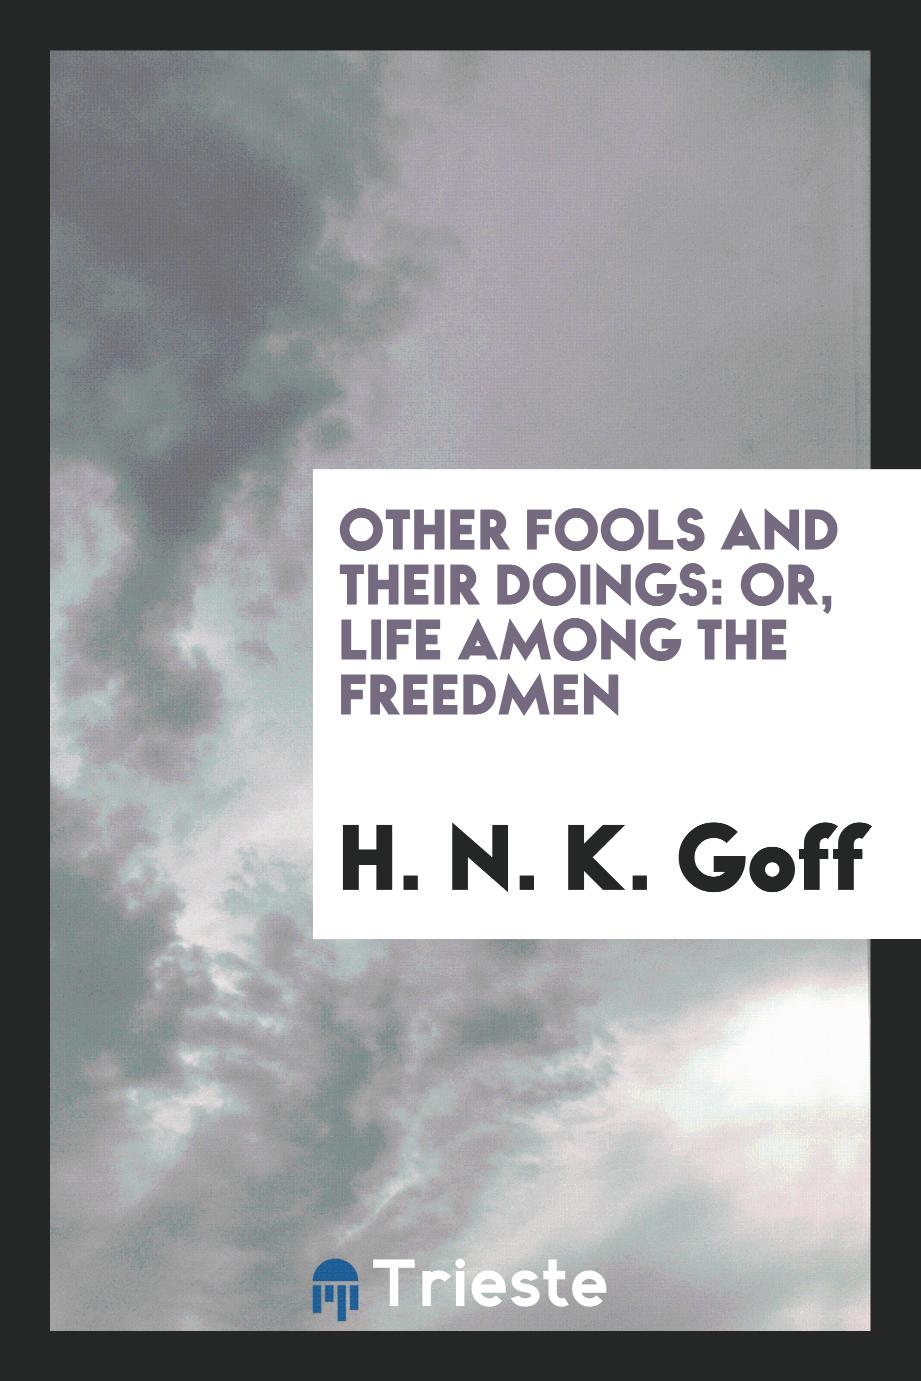 Other fools and their doings: or, Life among the freedmen